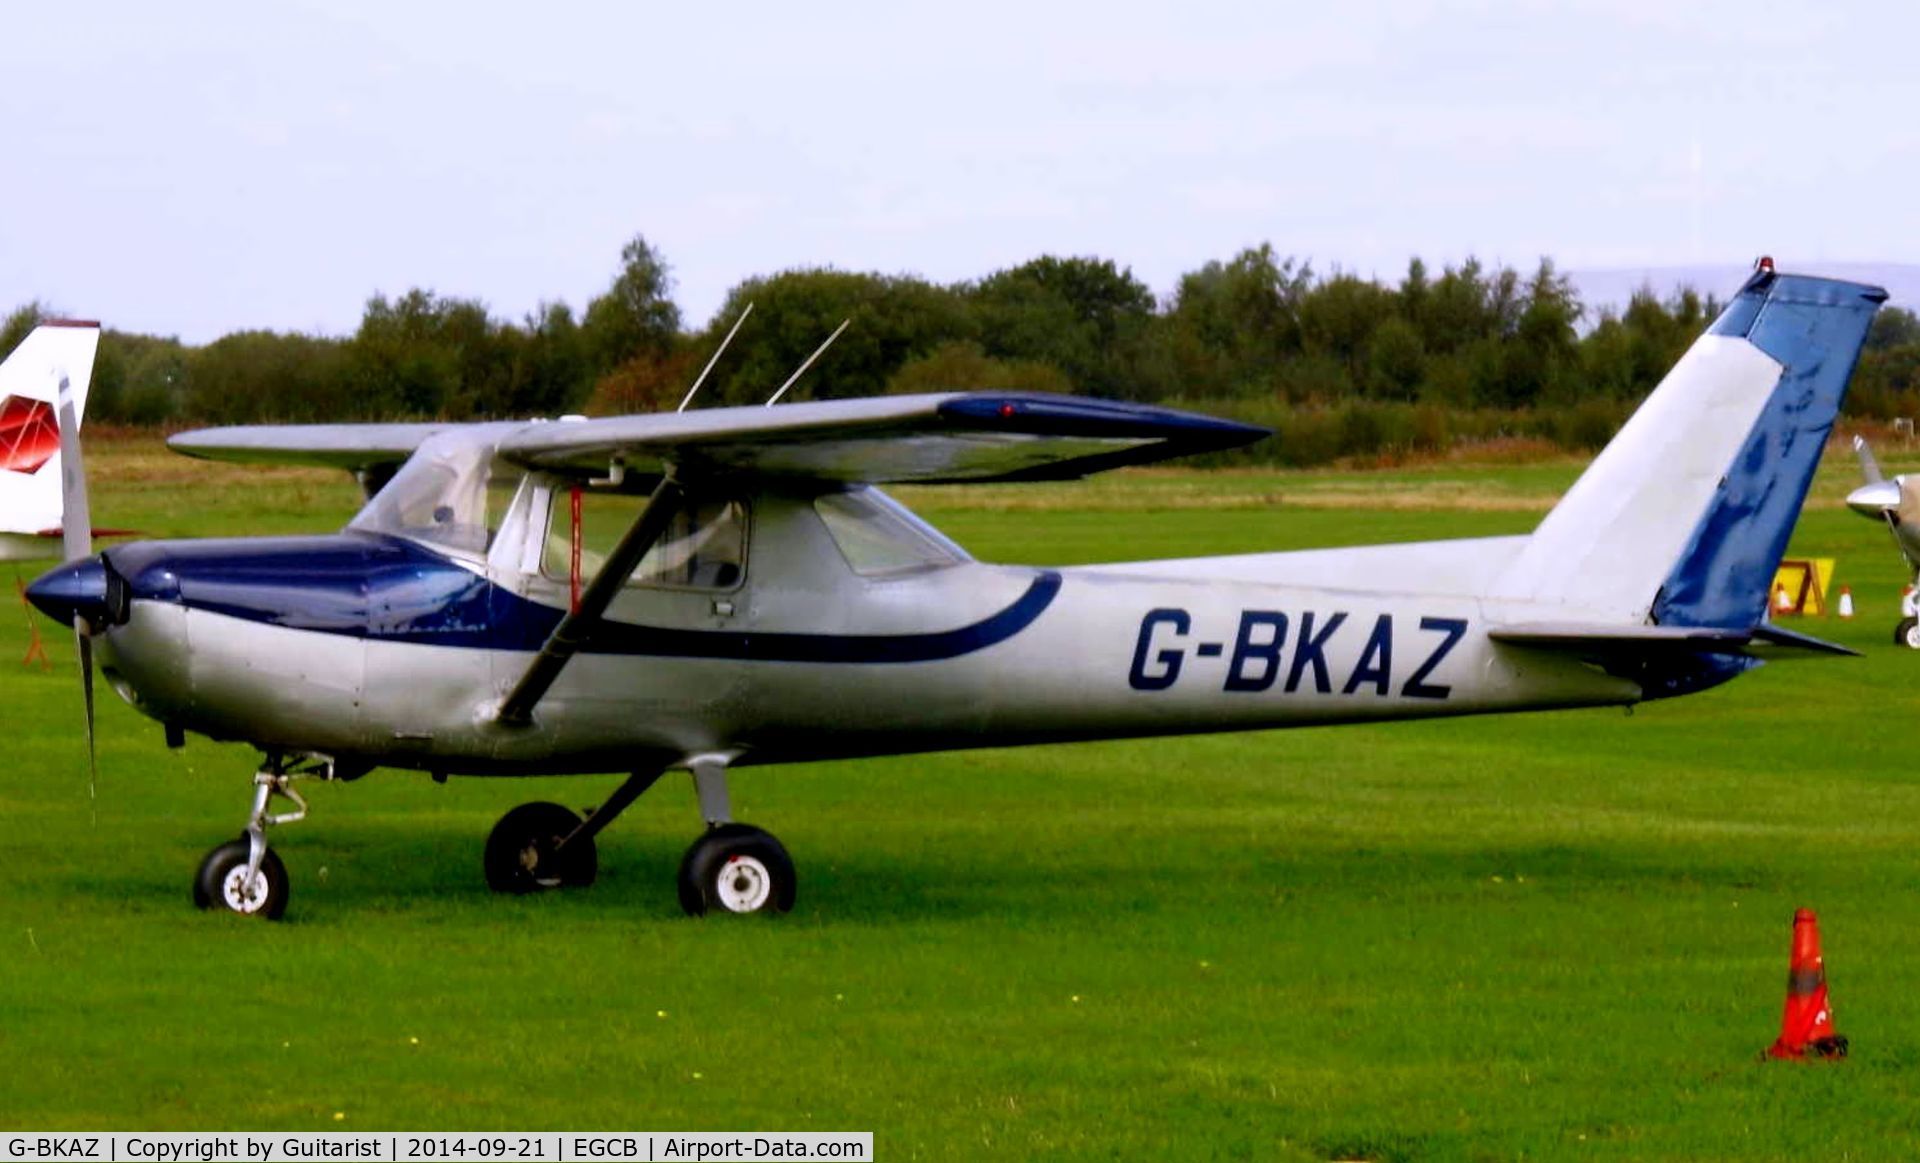 G-BKAZ, 1979 Cessna 152 C/N 152-82832, At the City Airport Manchester